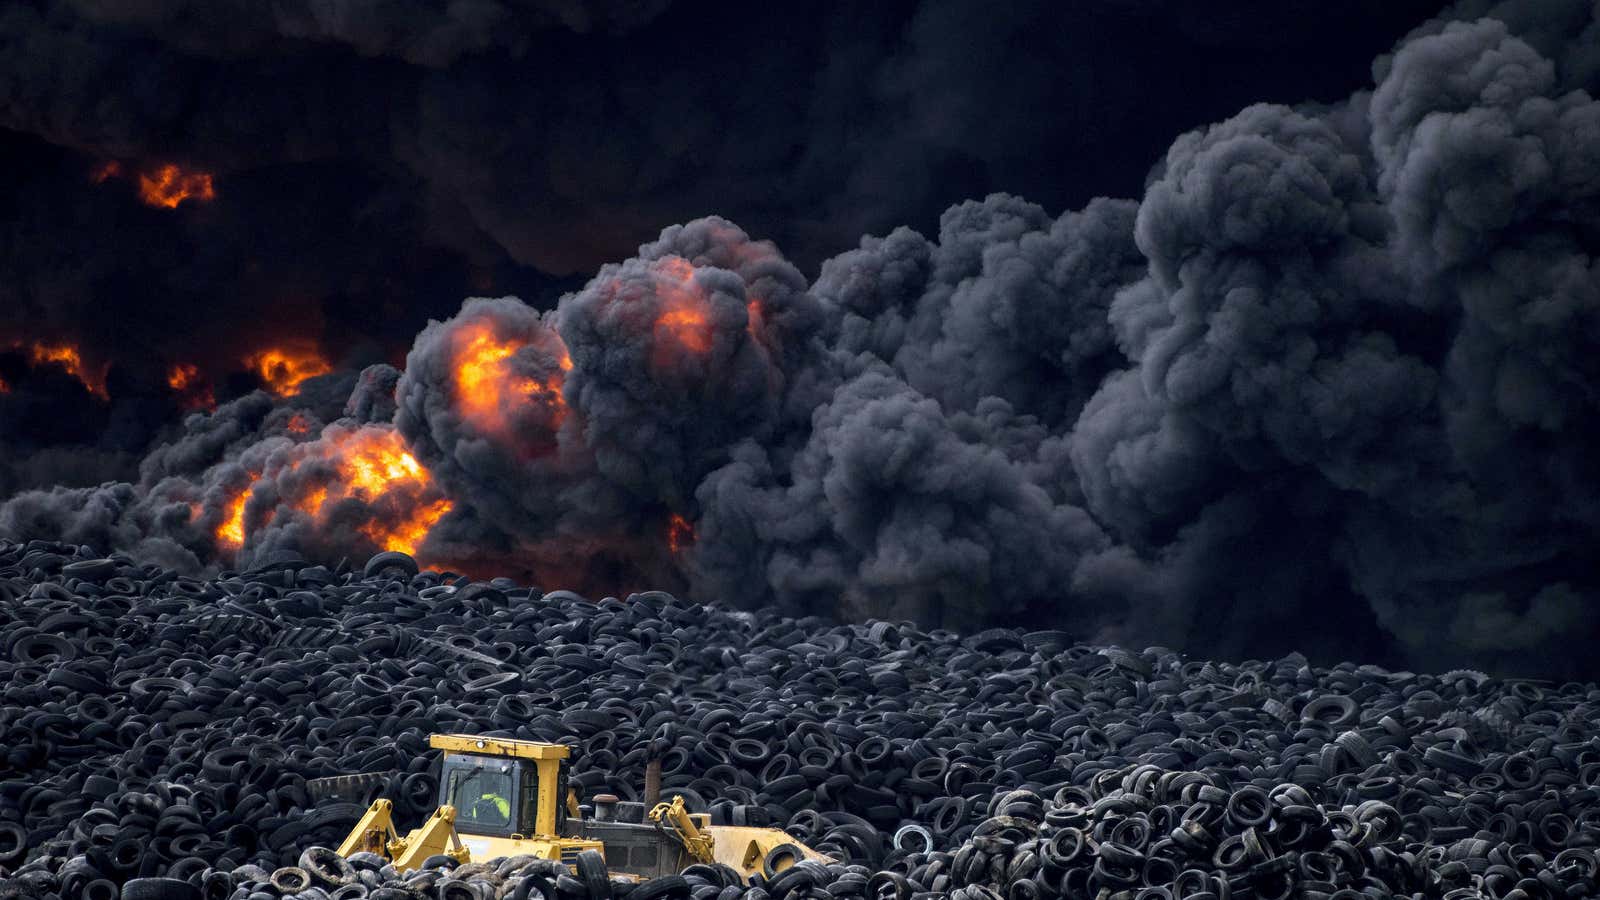 Photos capture plumes of smoke caused by a raging fire at a tire dump in Toledo, Spain.